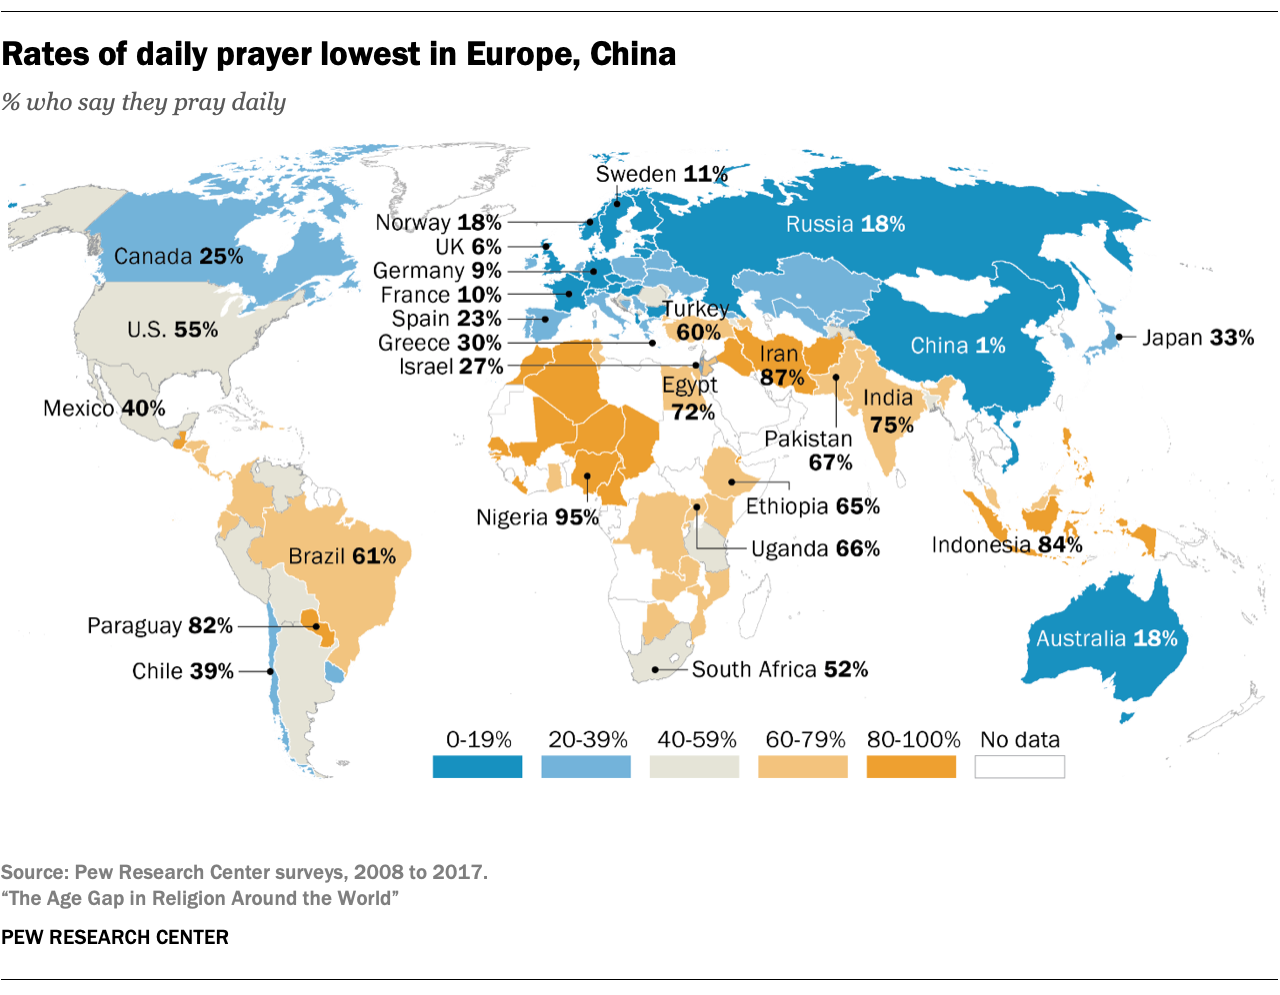 Rates of daily prayer lowest in Europe, China